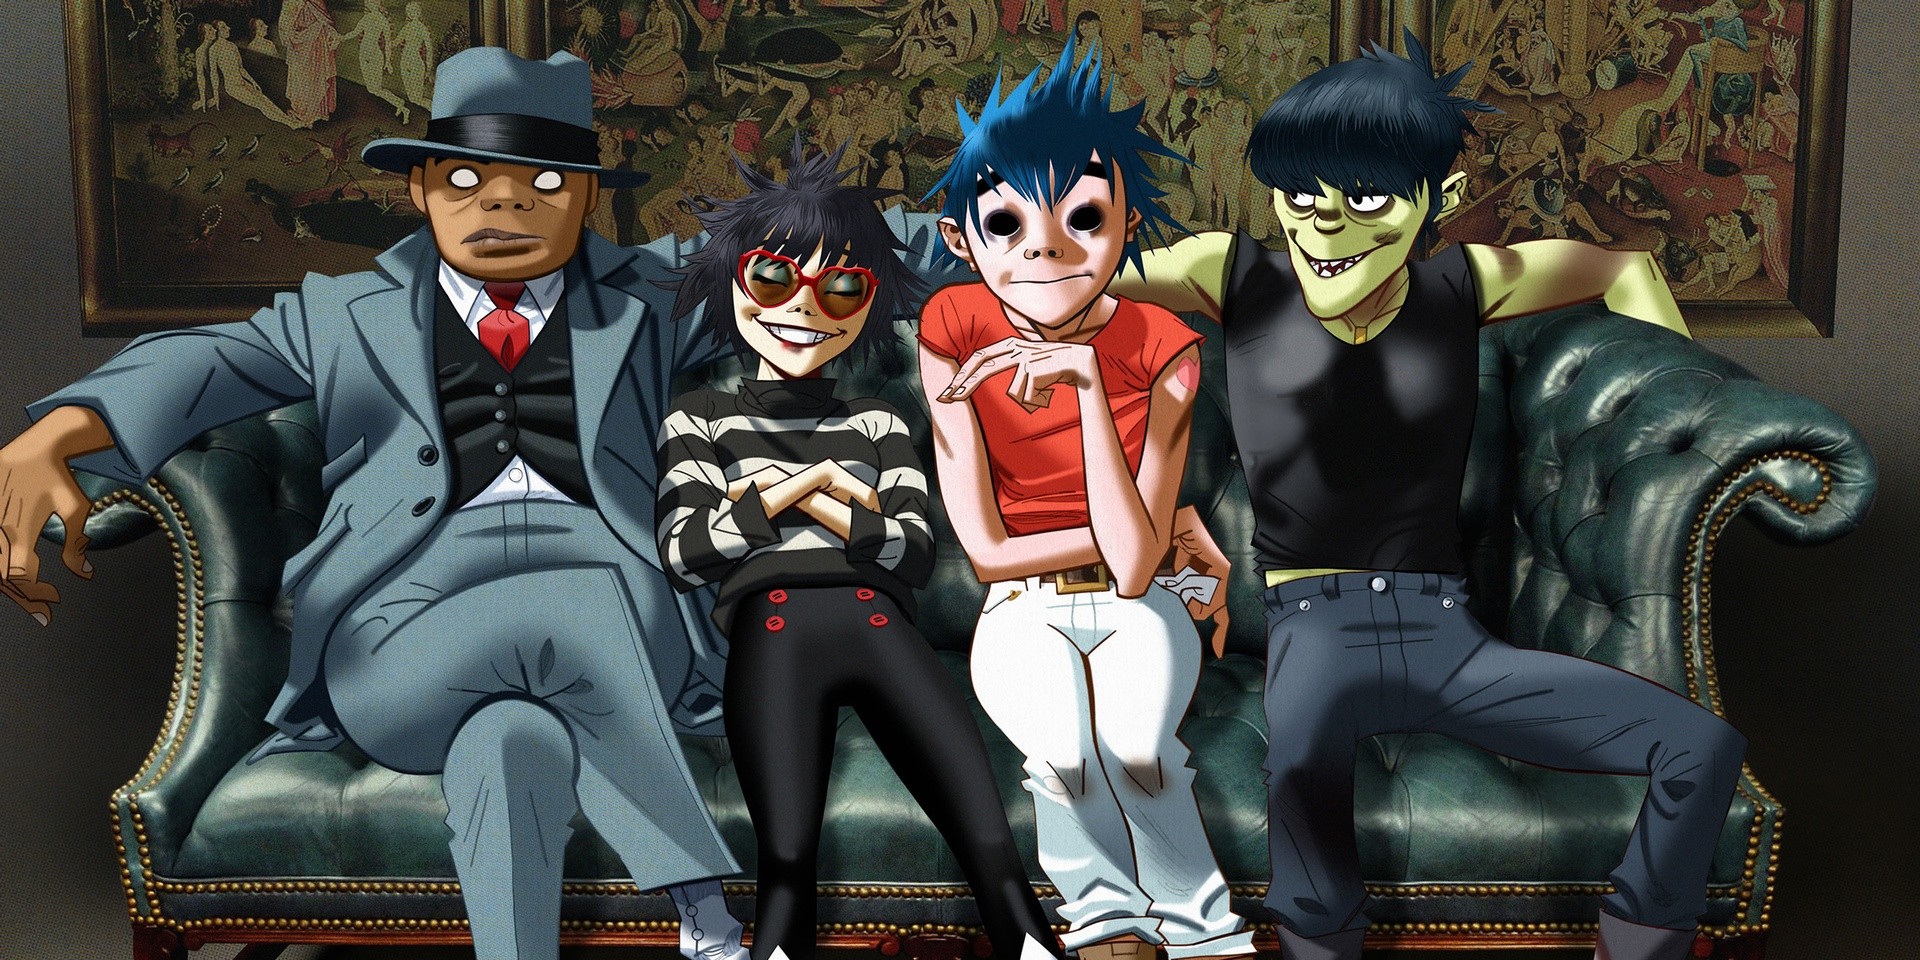 Tickets to Gorillaz' movie screening in Singapore now on sale 